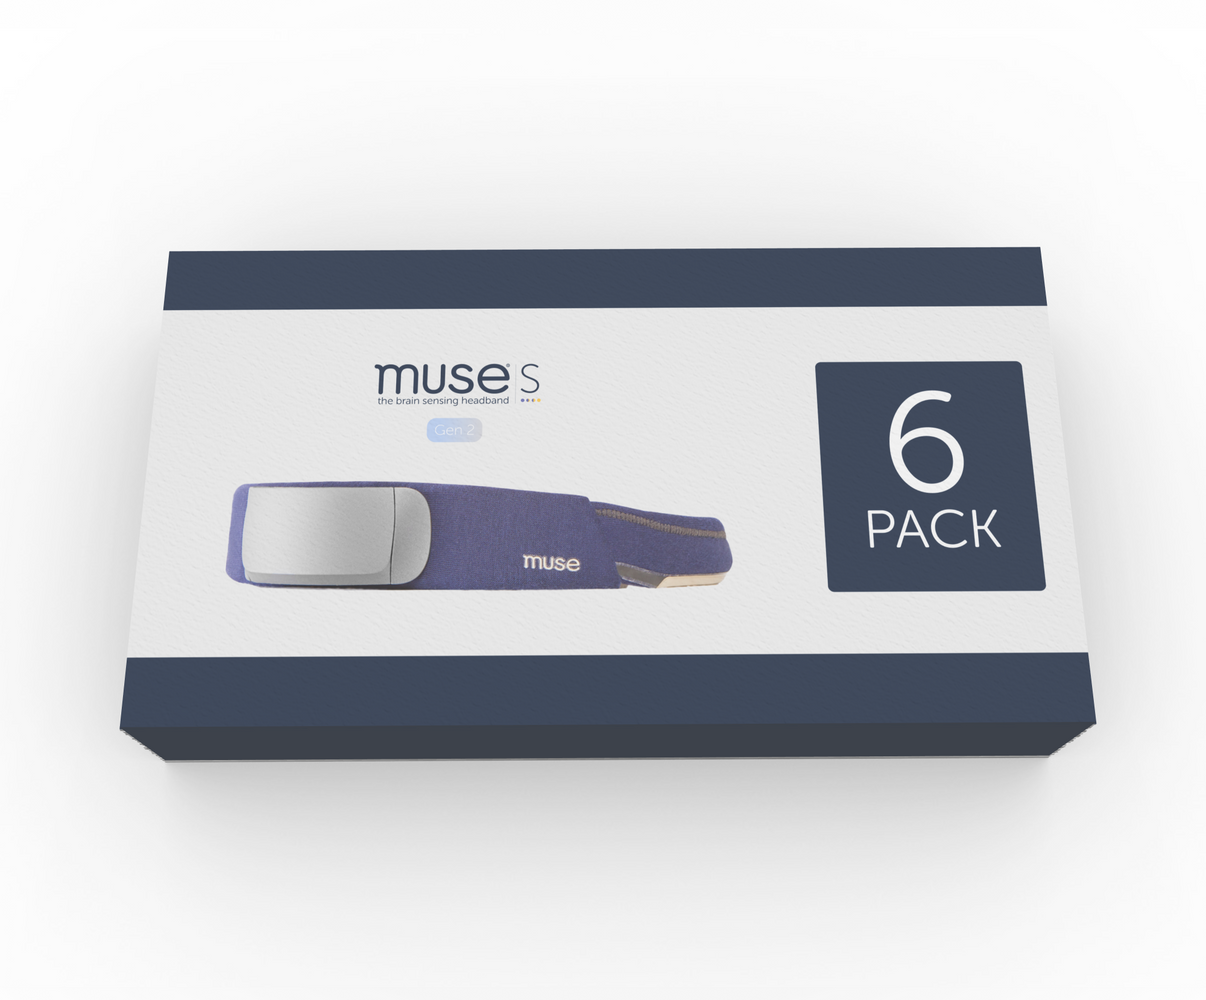 Muse S (Gen 2) - 6 Pack